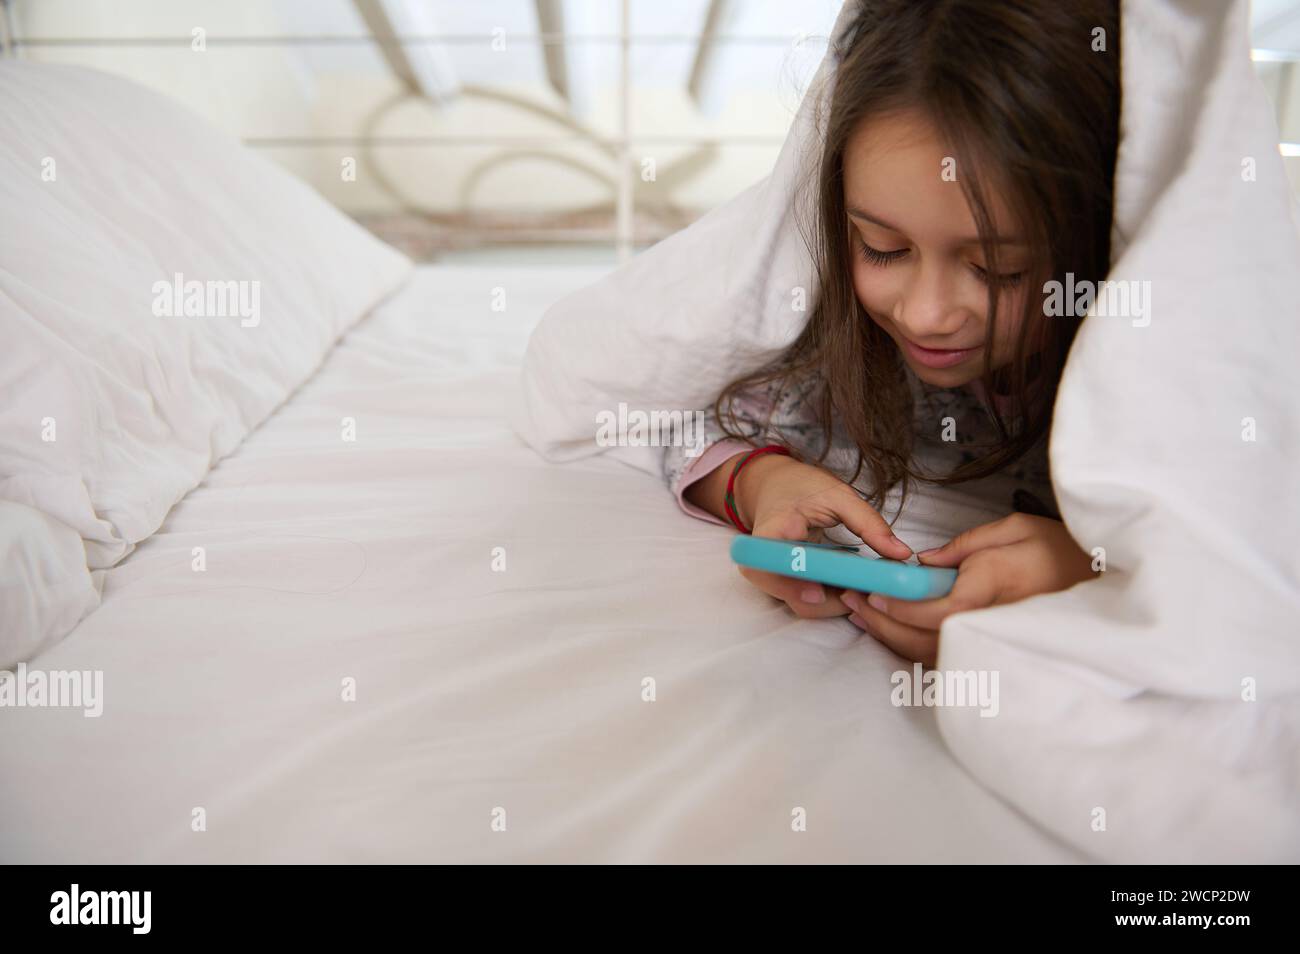 Curious mischievous little kid girl in pajamas, playing online video games, washing cartoons, checking social media content on her smart mobile phone, Stock Photo